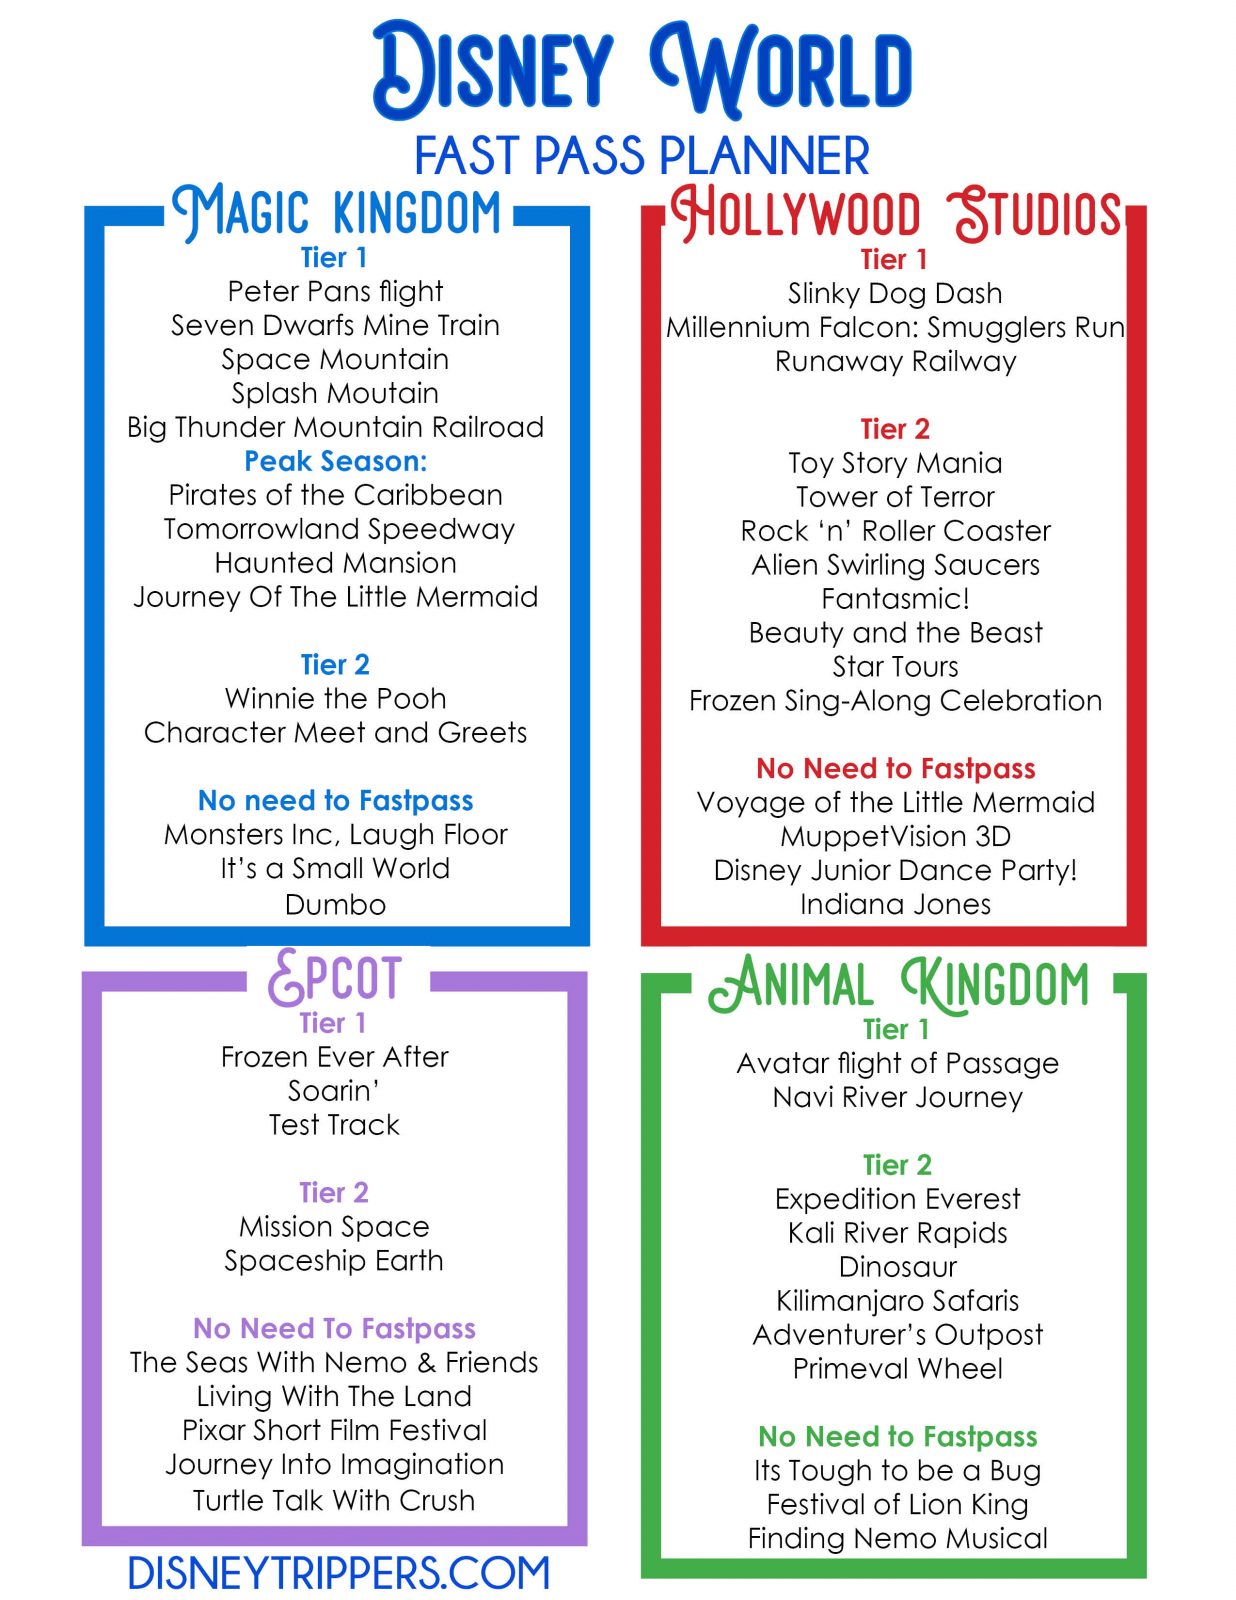 Ultimate Disney World Fastpass Planner | best and worst Fastpasses for Disney | Disney fastpass secrets | what are the best fastpasses at Disney | top Disney Fastpass ideas | best Fastpass tiers at Disney World | disney travel tips | free disney printable | how to plan a trip to Disney #disney